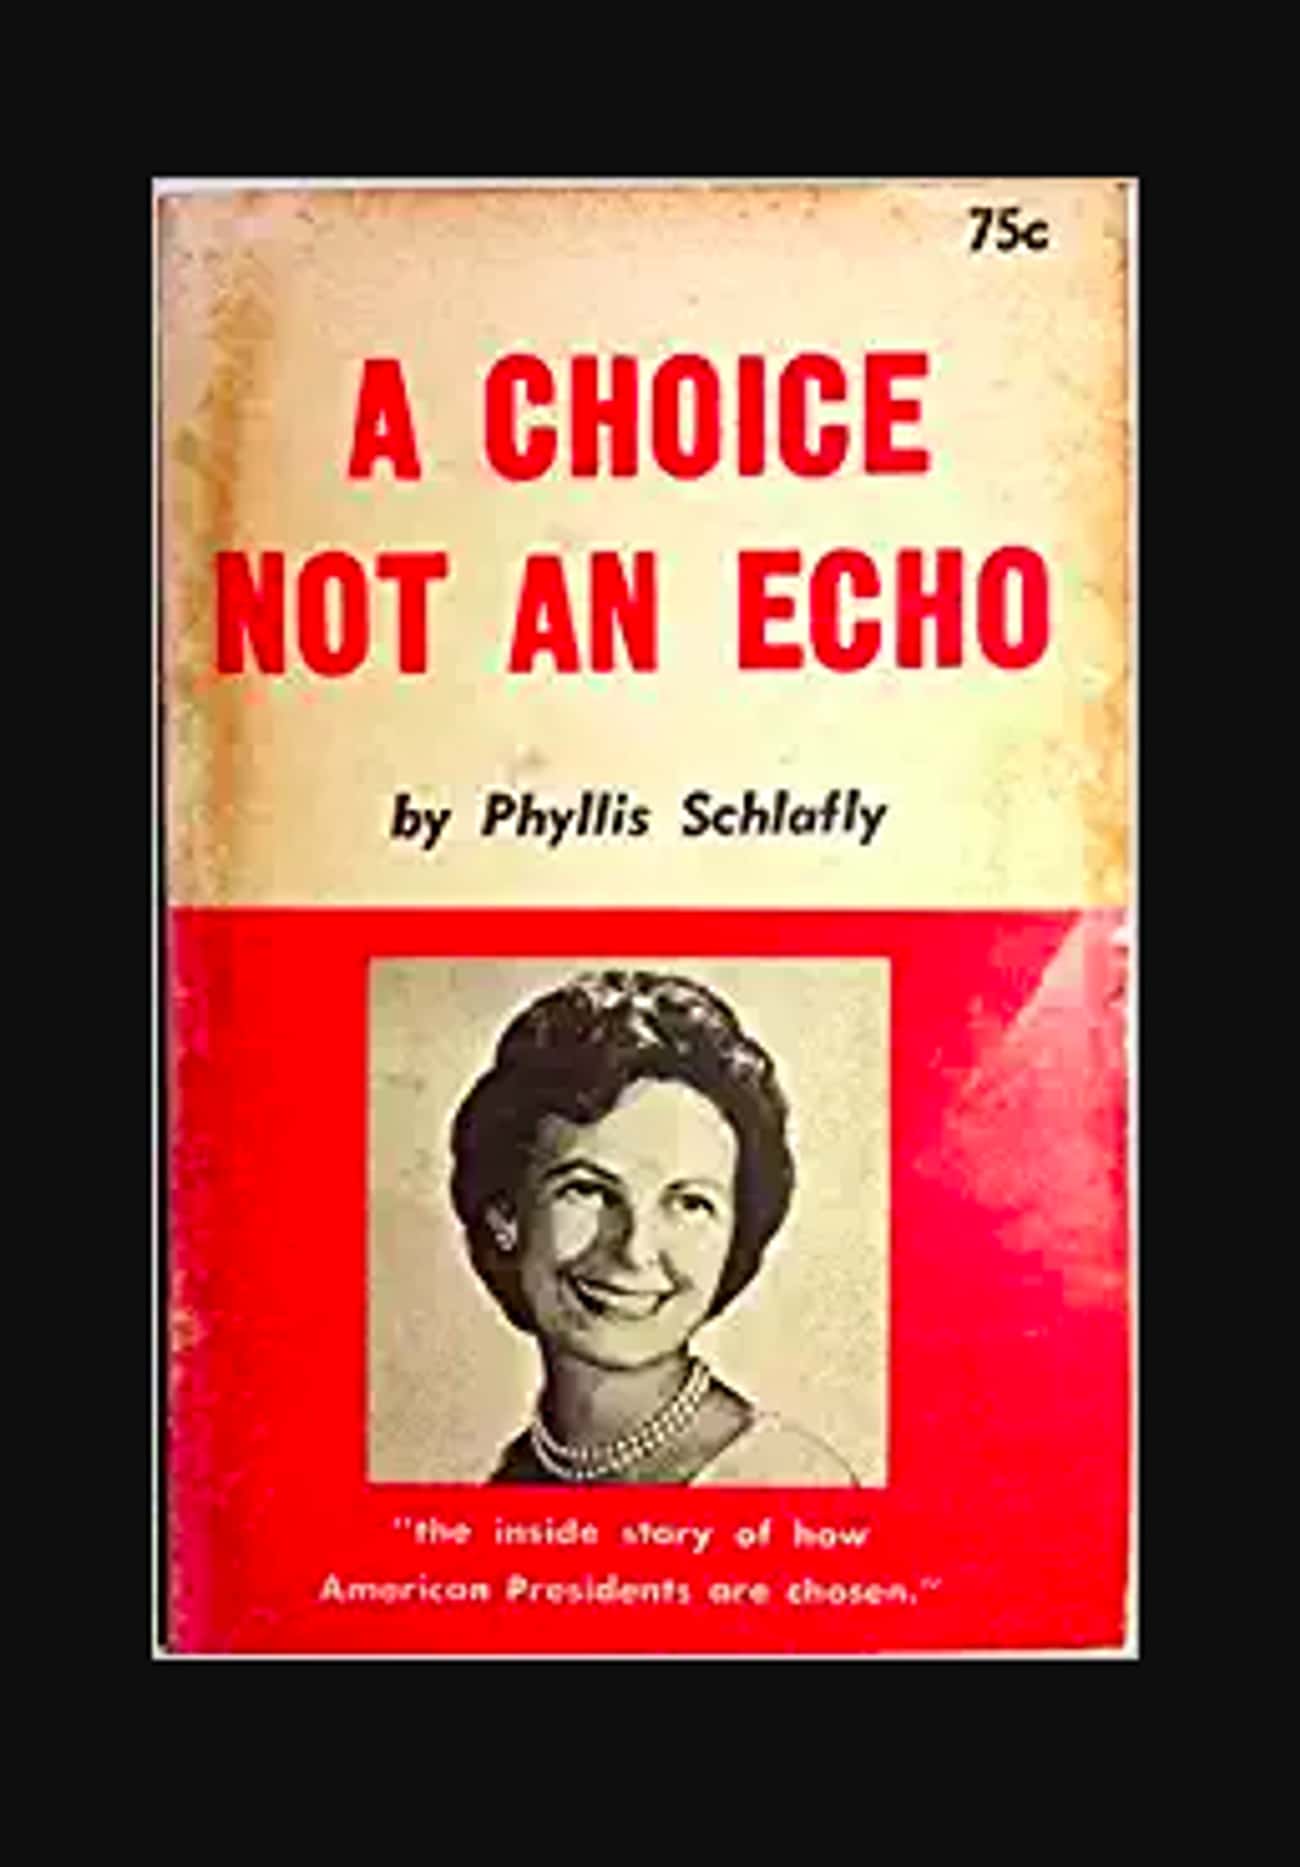 Phyllis Schlafly Declared The ERA Would Hurt Housewives